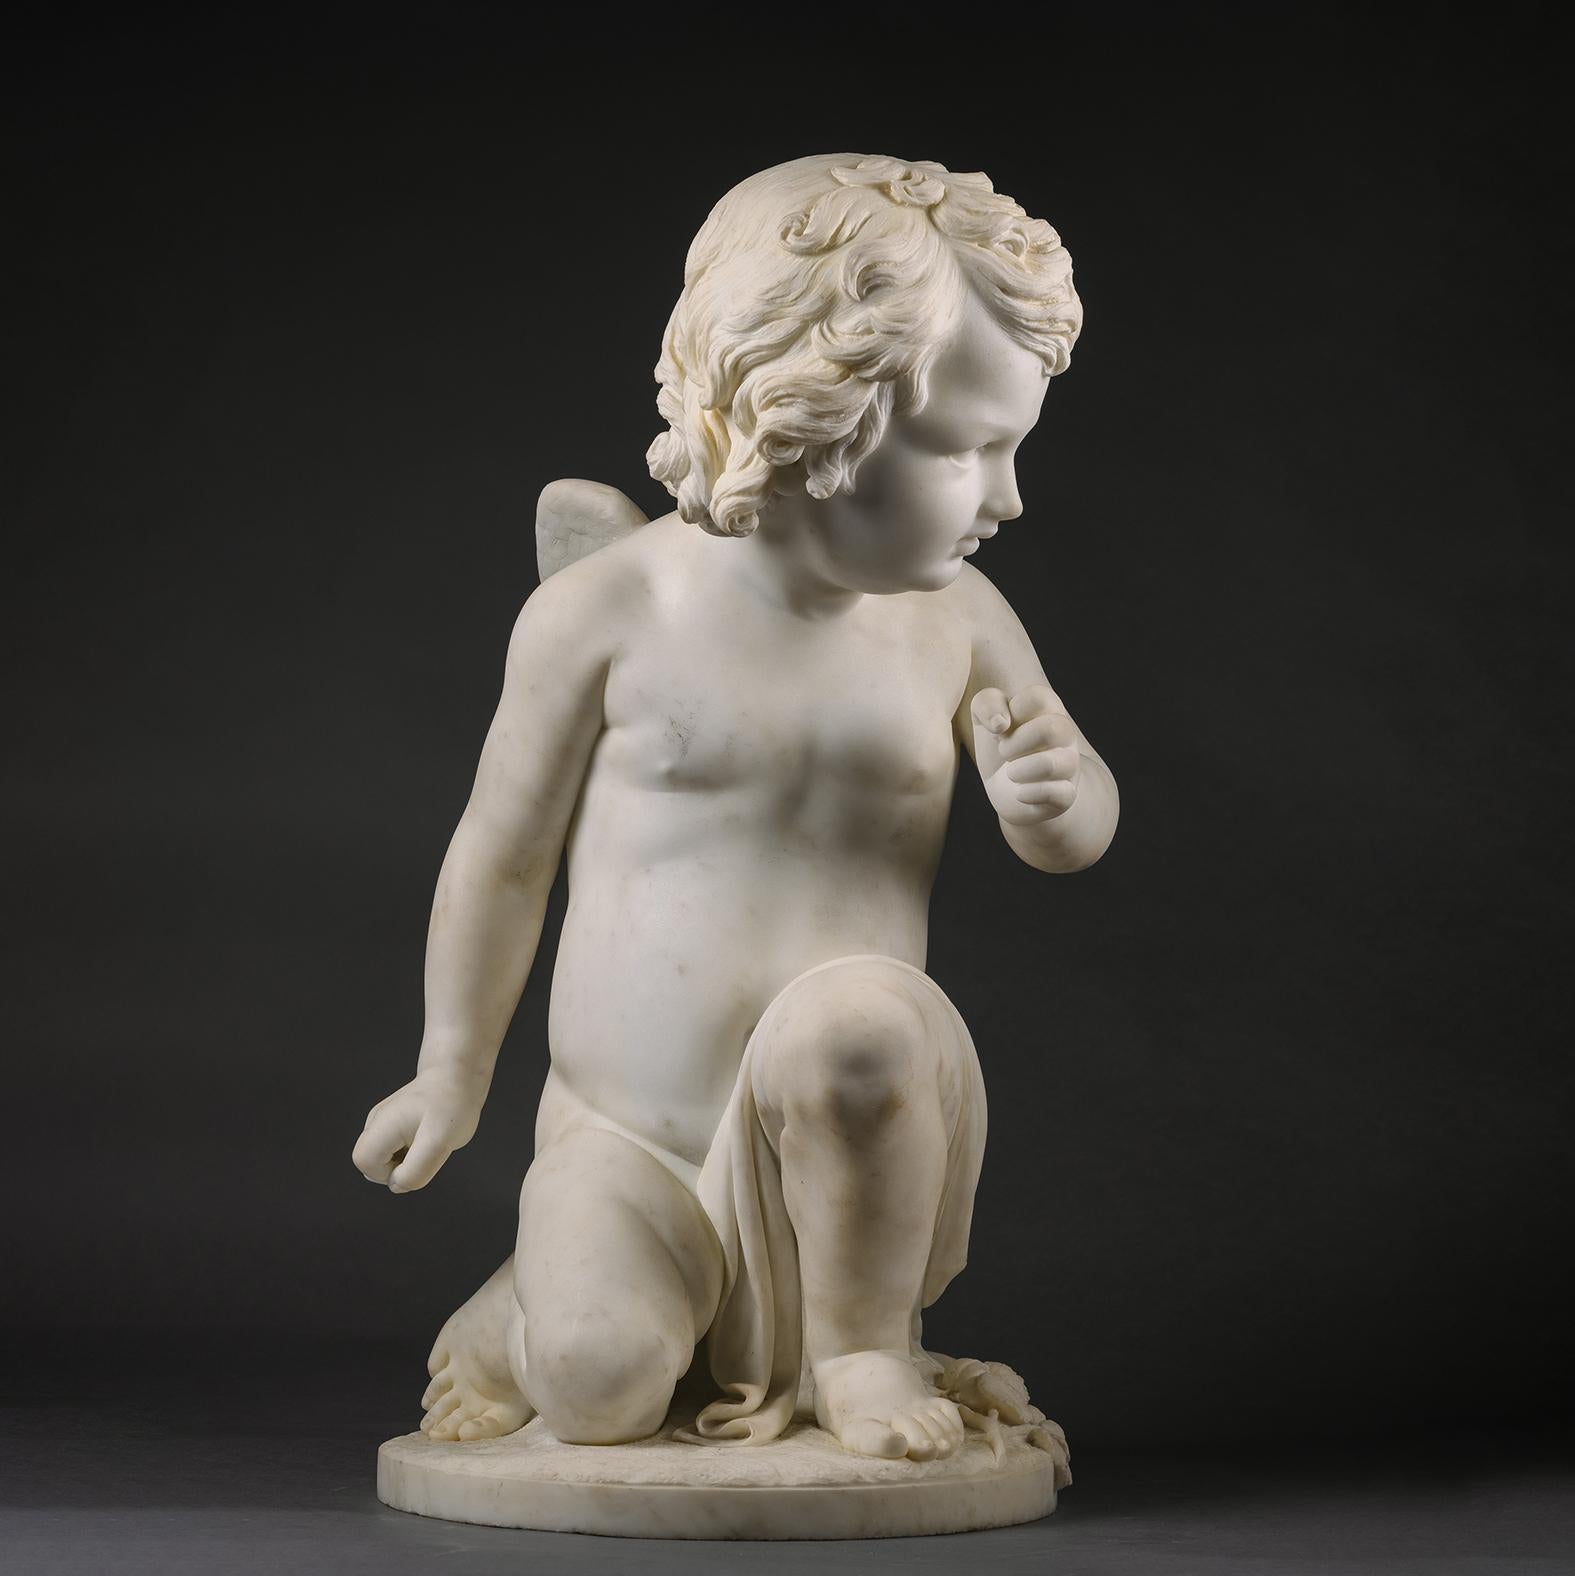 A Fine White Marble Figure of a Kneeling Cherub, By Pio Fedi.

Signed to the base 'Pio Fedi Faceva'.

Italian, Circa 1860.

Pio Fedi (1815-1892) was an Italian sculptor working in the nineteenth century with a studio in Florence at 89 Via de